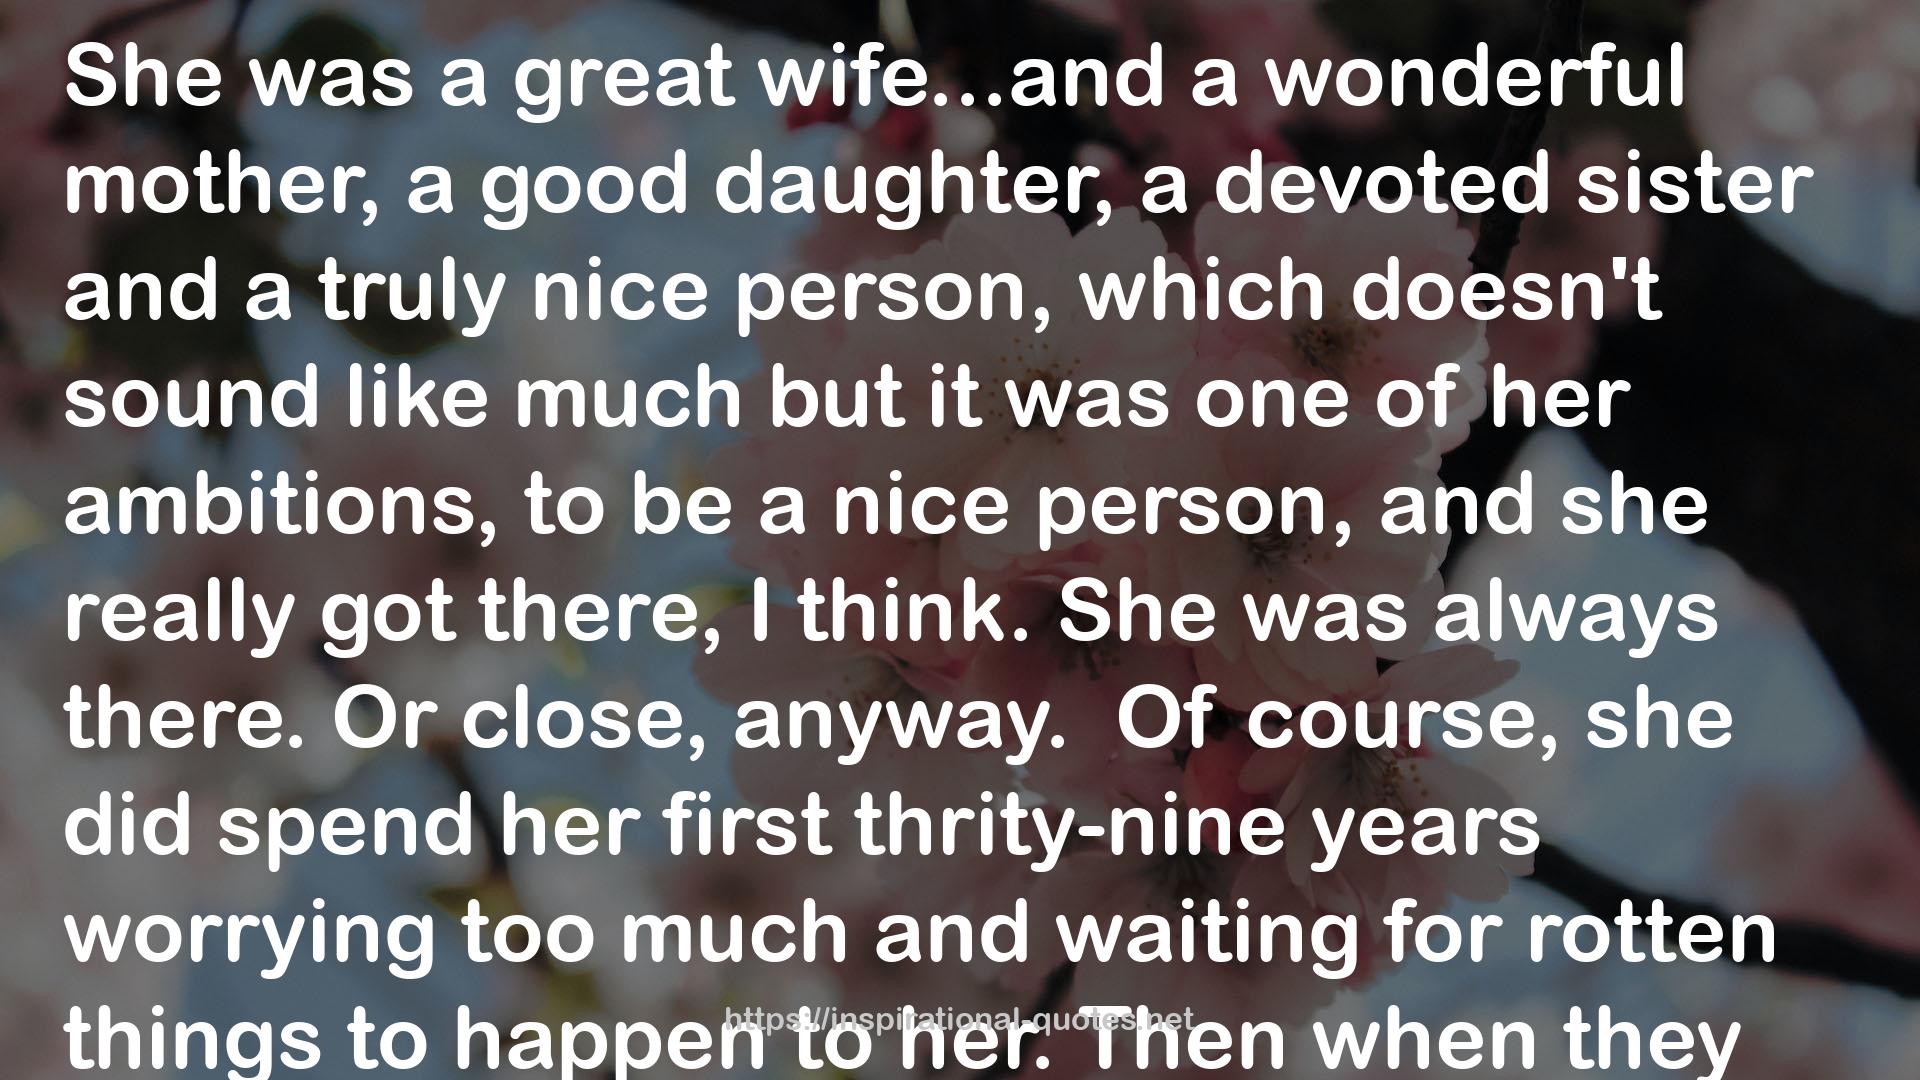 her first thrity-nine years  QUOTES